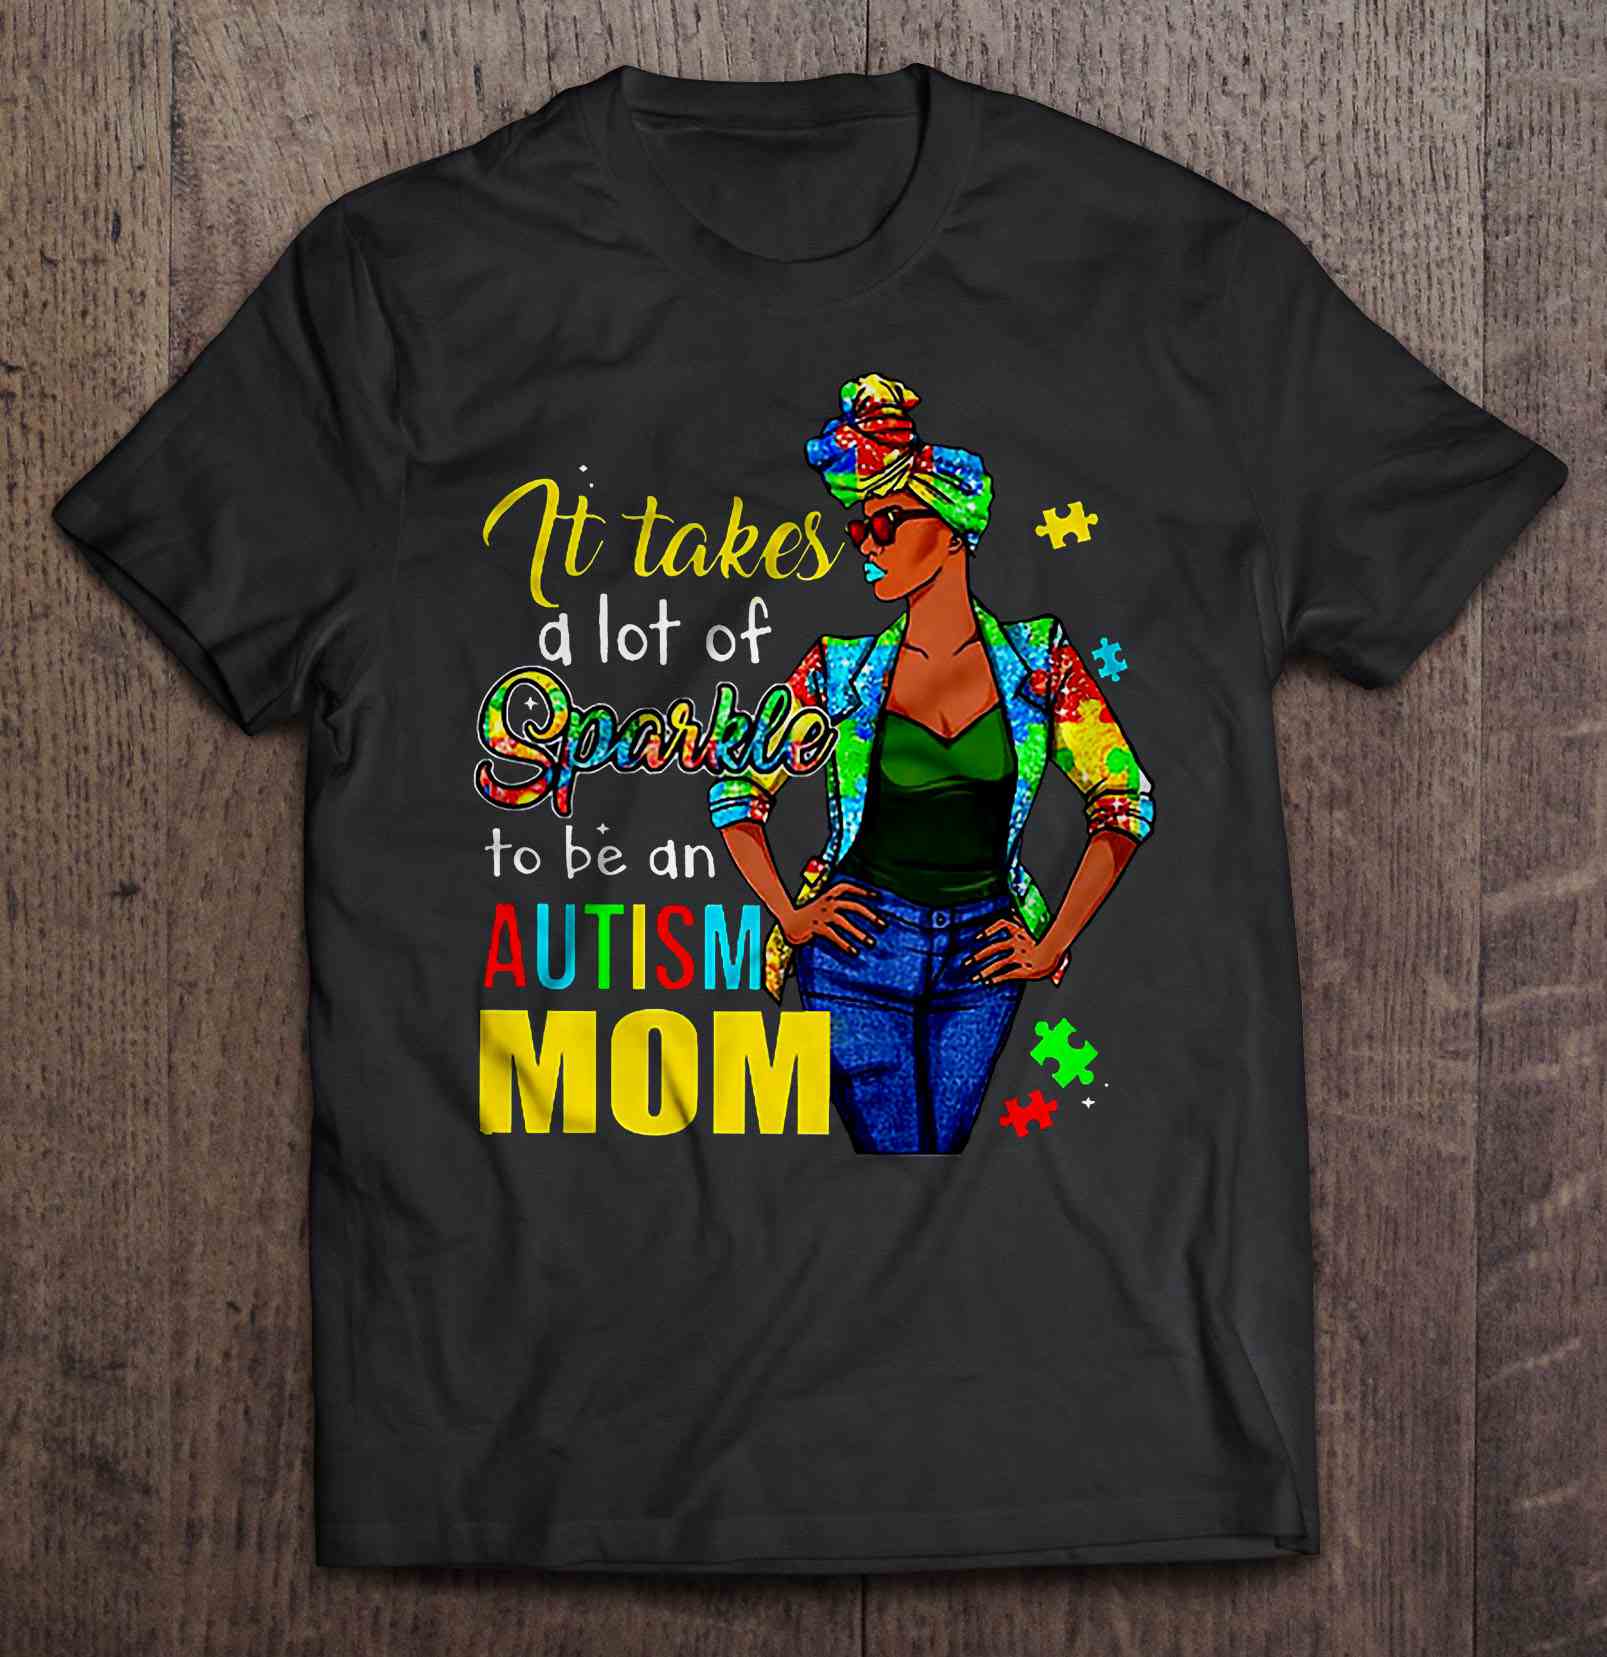 It Takes A Lot Of Sparkle To Be An Autism Mom - Black Woman